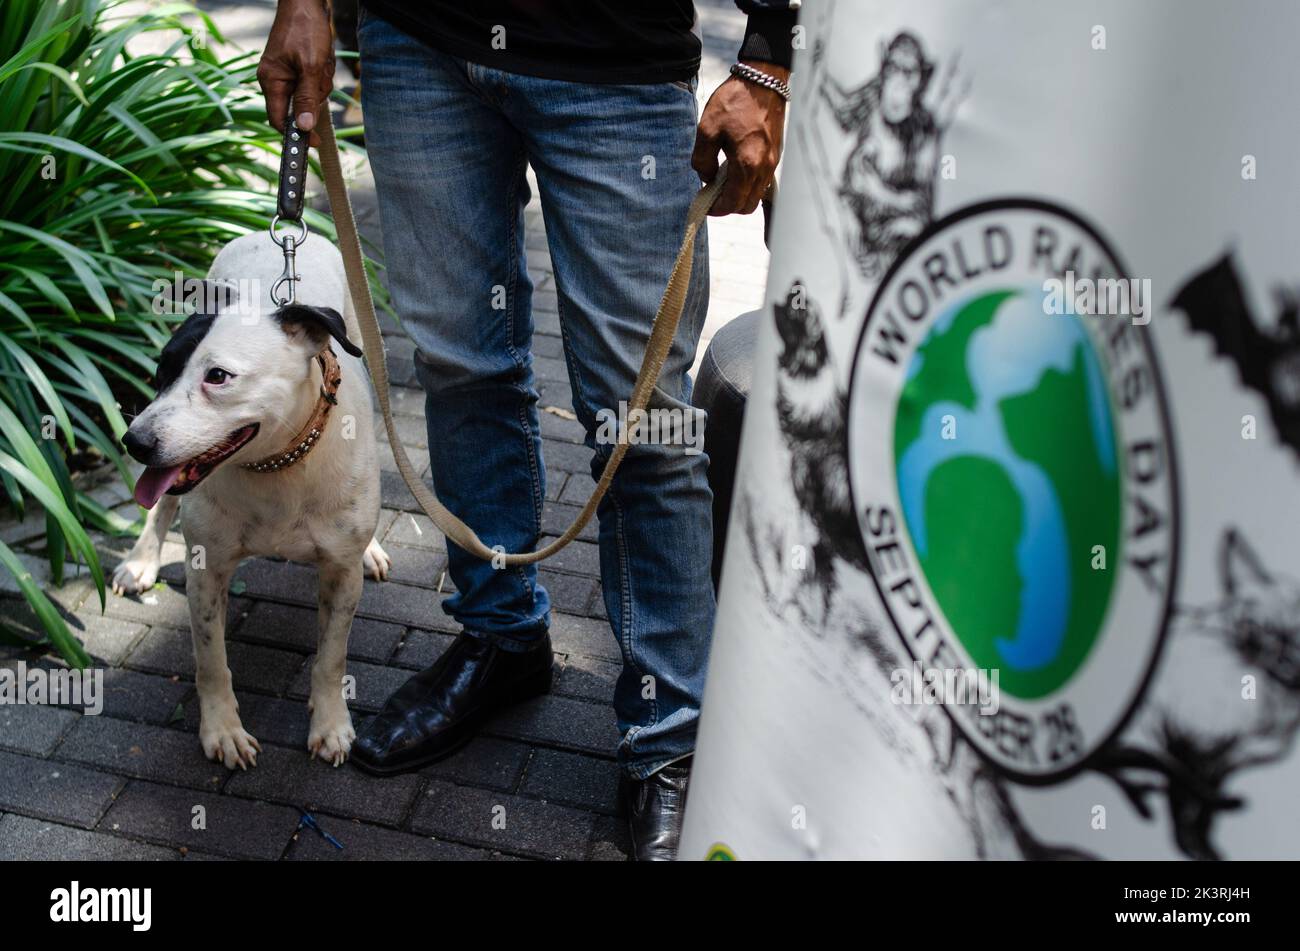 Bandung, Indonesia. 28th Sep, 2022. A man takes his dog to receive a dose of rabies vaccine in Bandung, West Java, Indonesia, Sept. 28, 2022. World Rabies Day is observed annually to raise awareness of rabies prevention and to highlight progress in defeating the disease. Credit: Septianjar/Xinhua/Alamy Live News Stock Photo